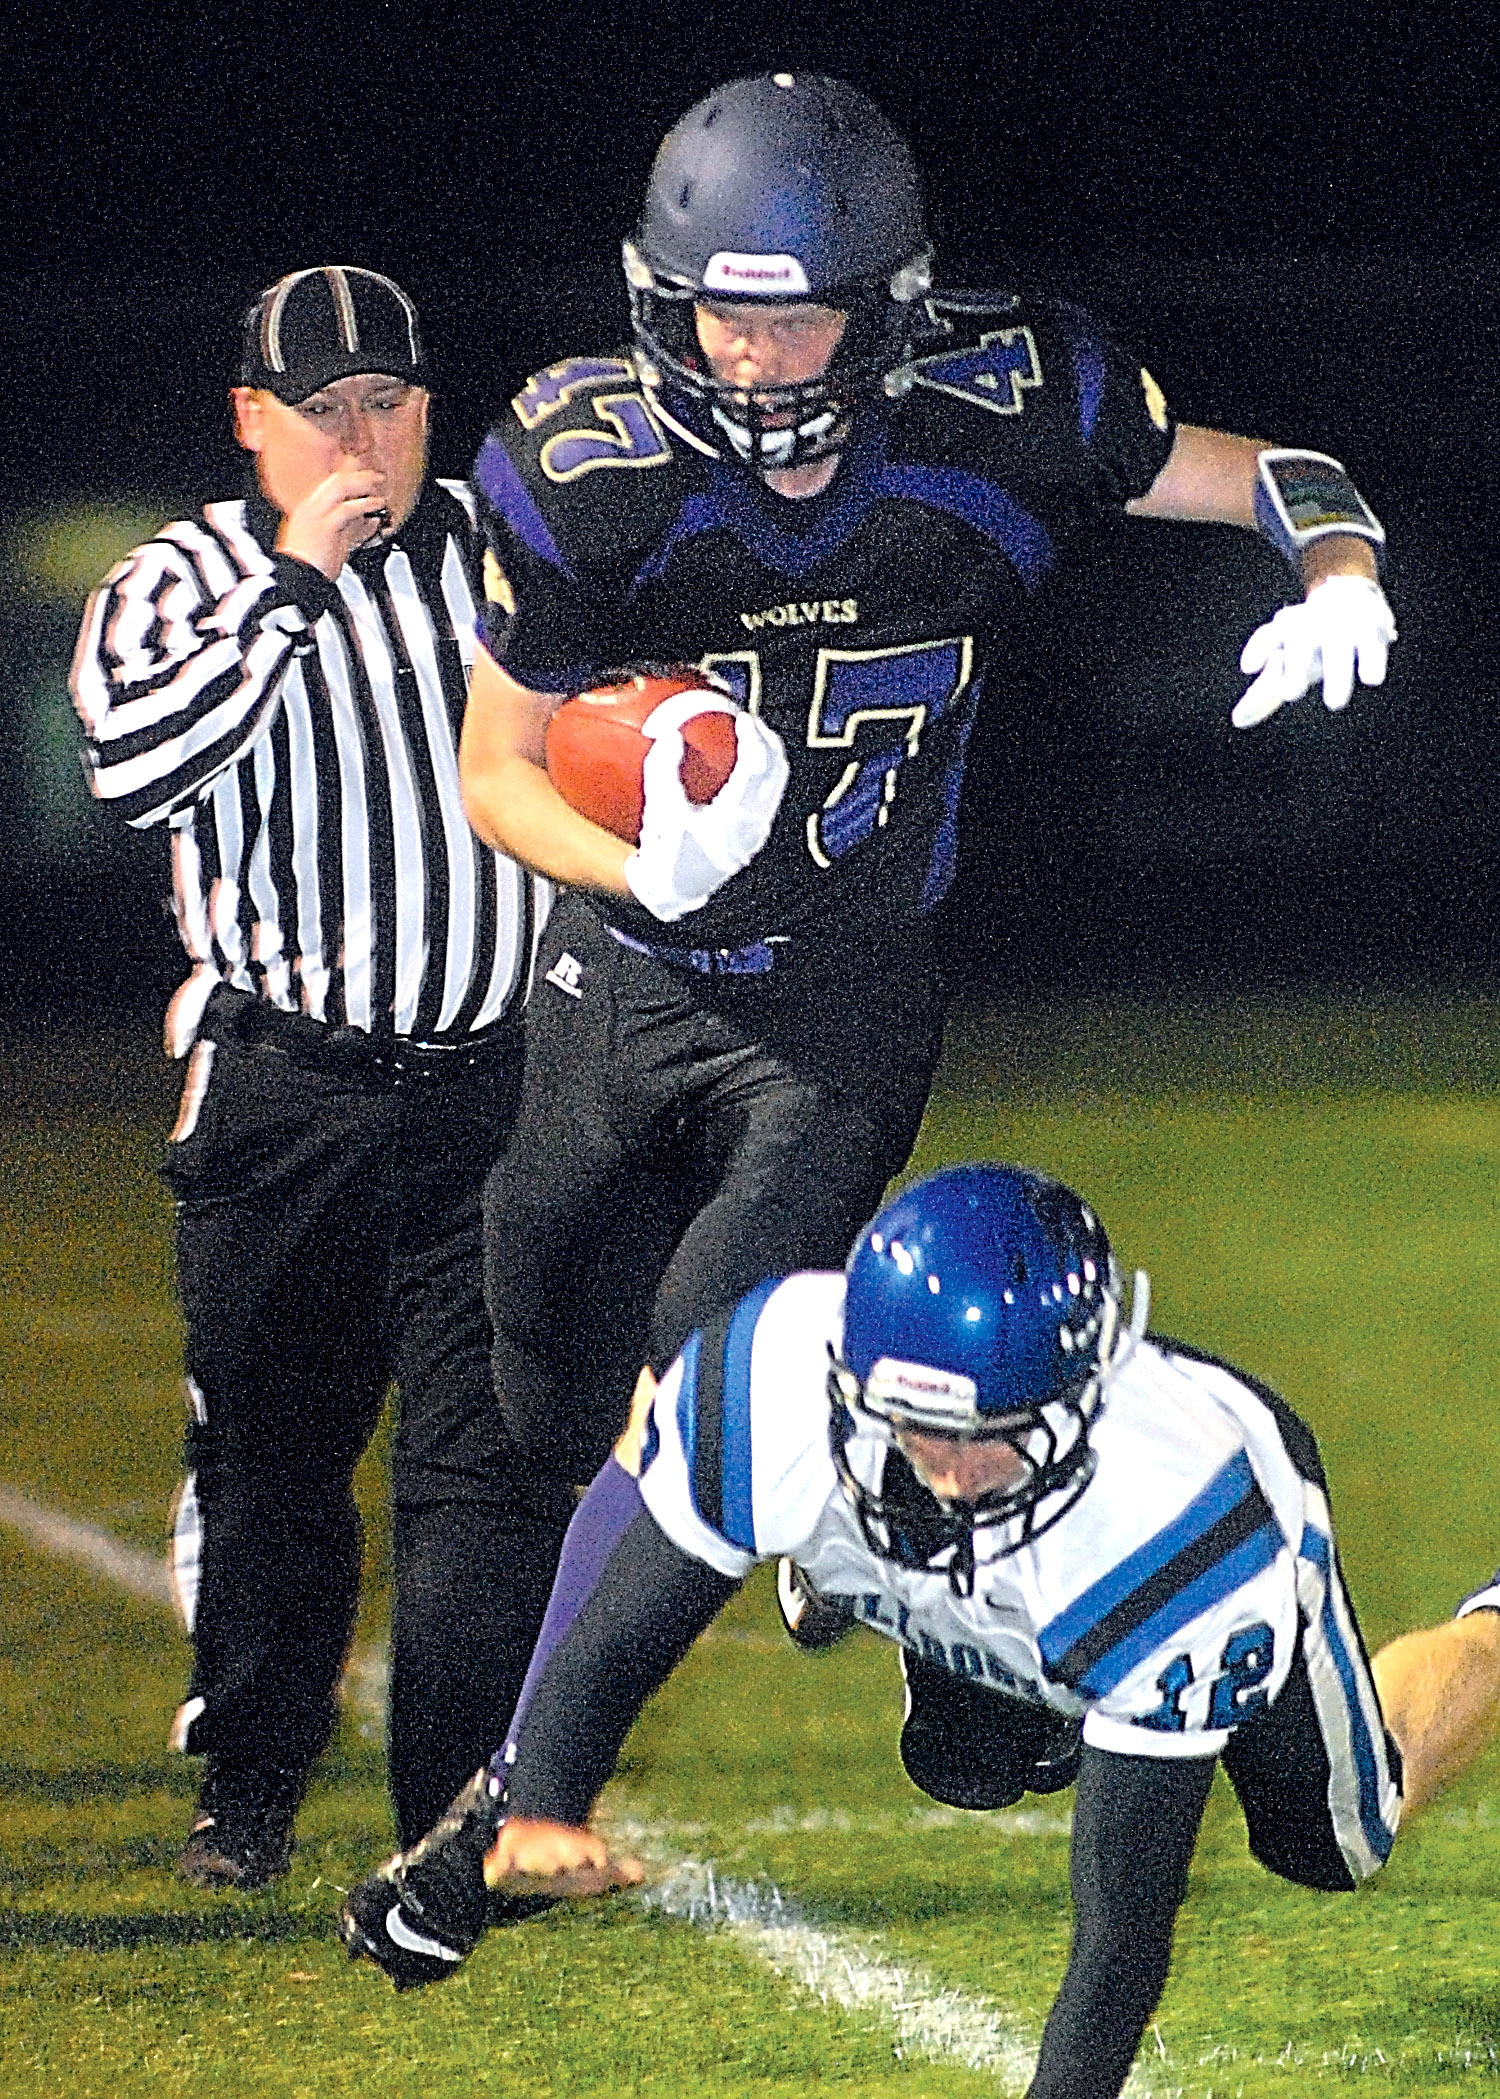 Sequim's Chris Frick gets knocked out of bounds by North Mason's Matt Becker during the second quarter of the Wolves' 26-20 overtime win. Keith Thorpe/Peninsula Daily News